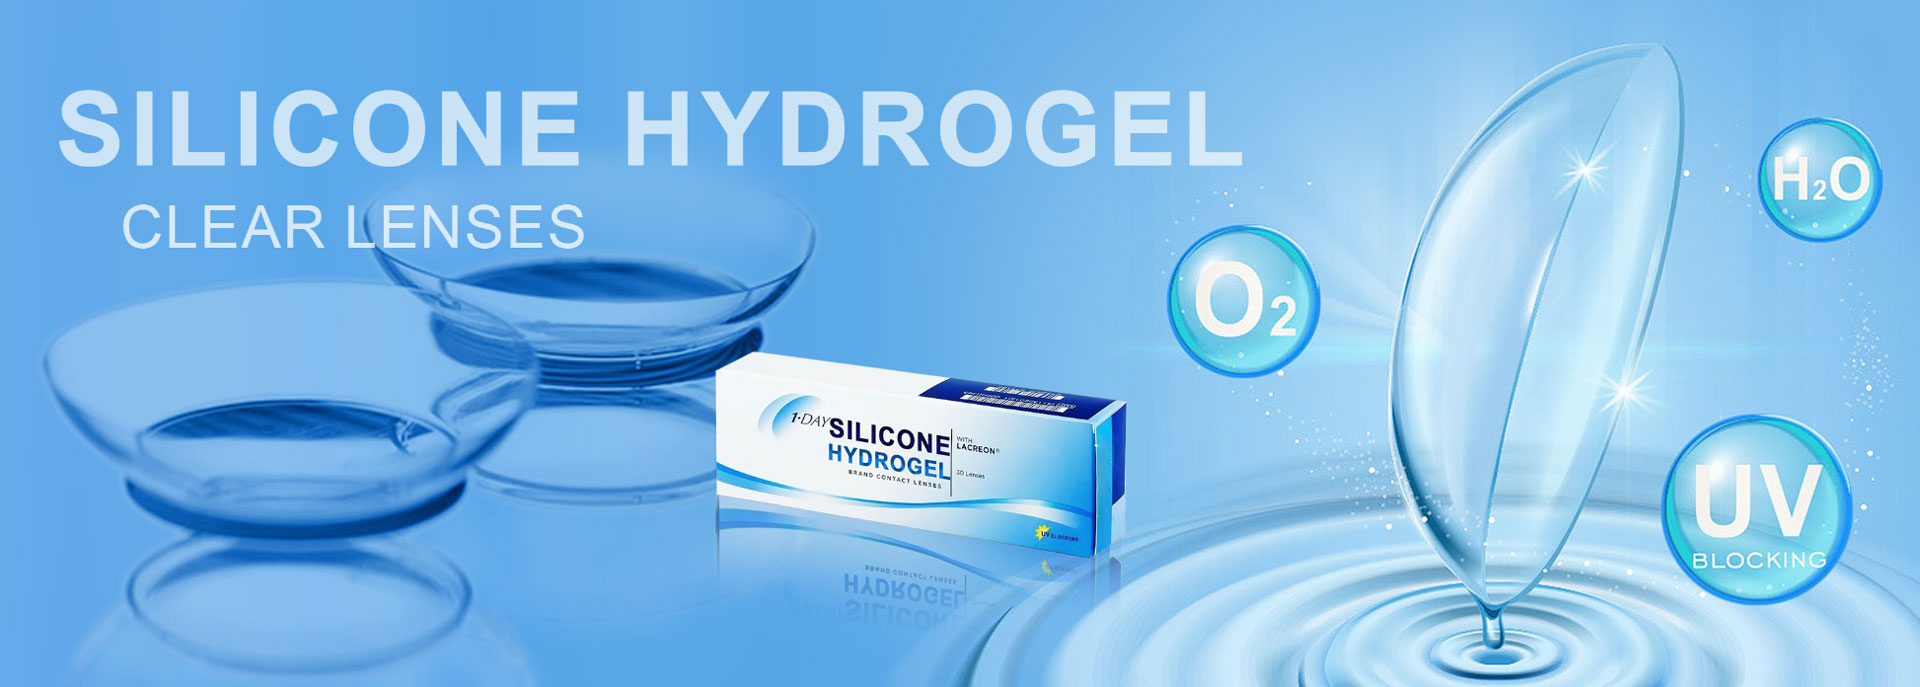 2-CLEAR-LENSES-SILICONEHYDROGEL